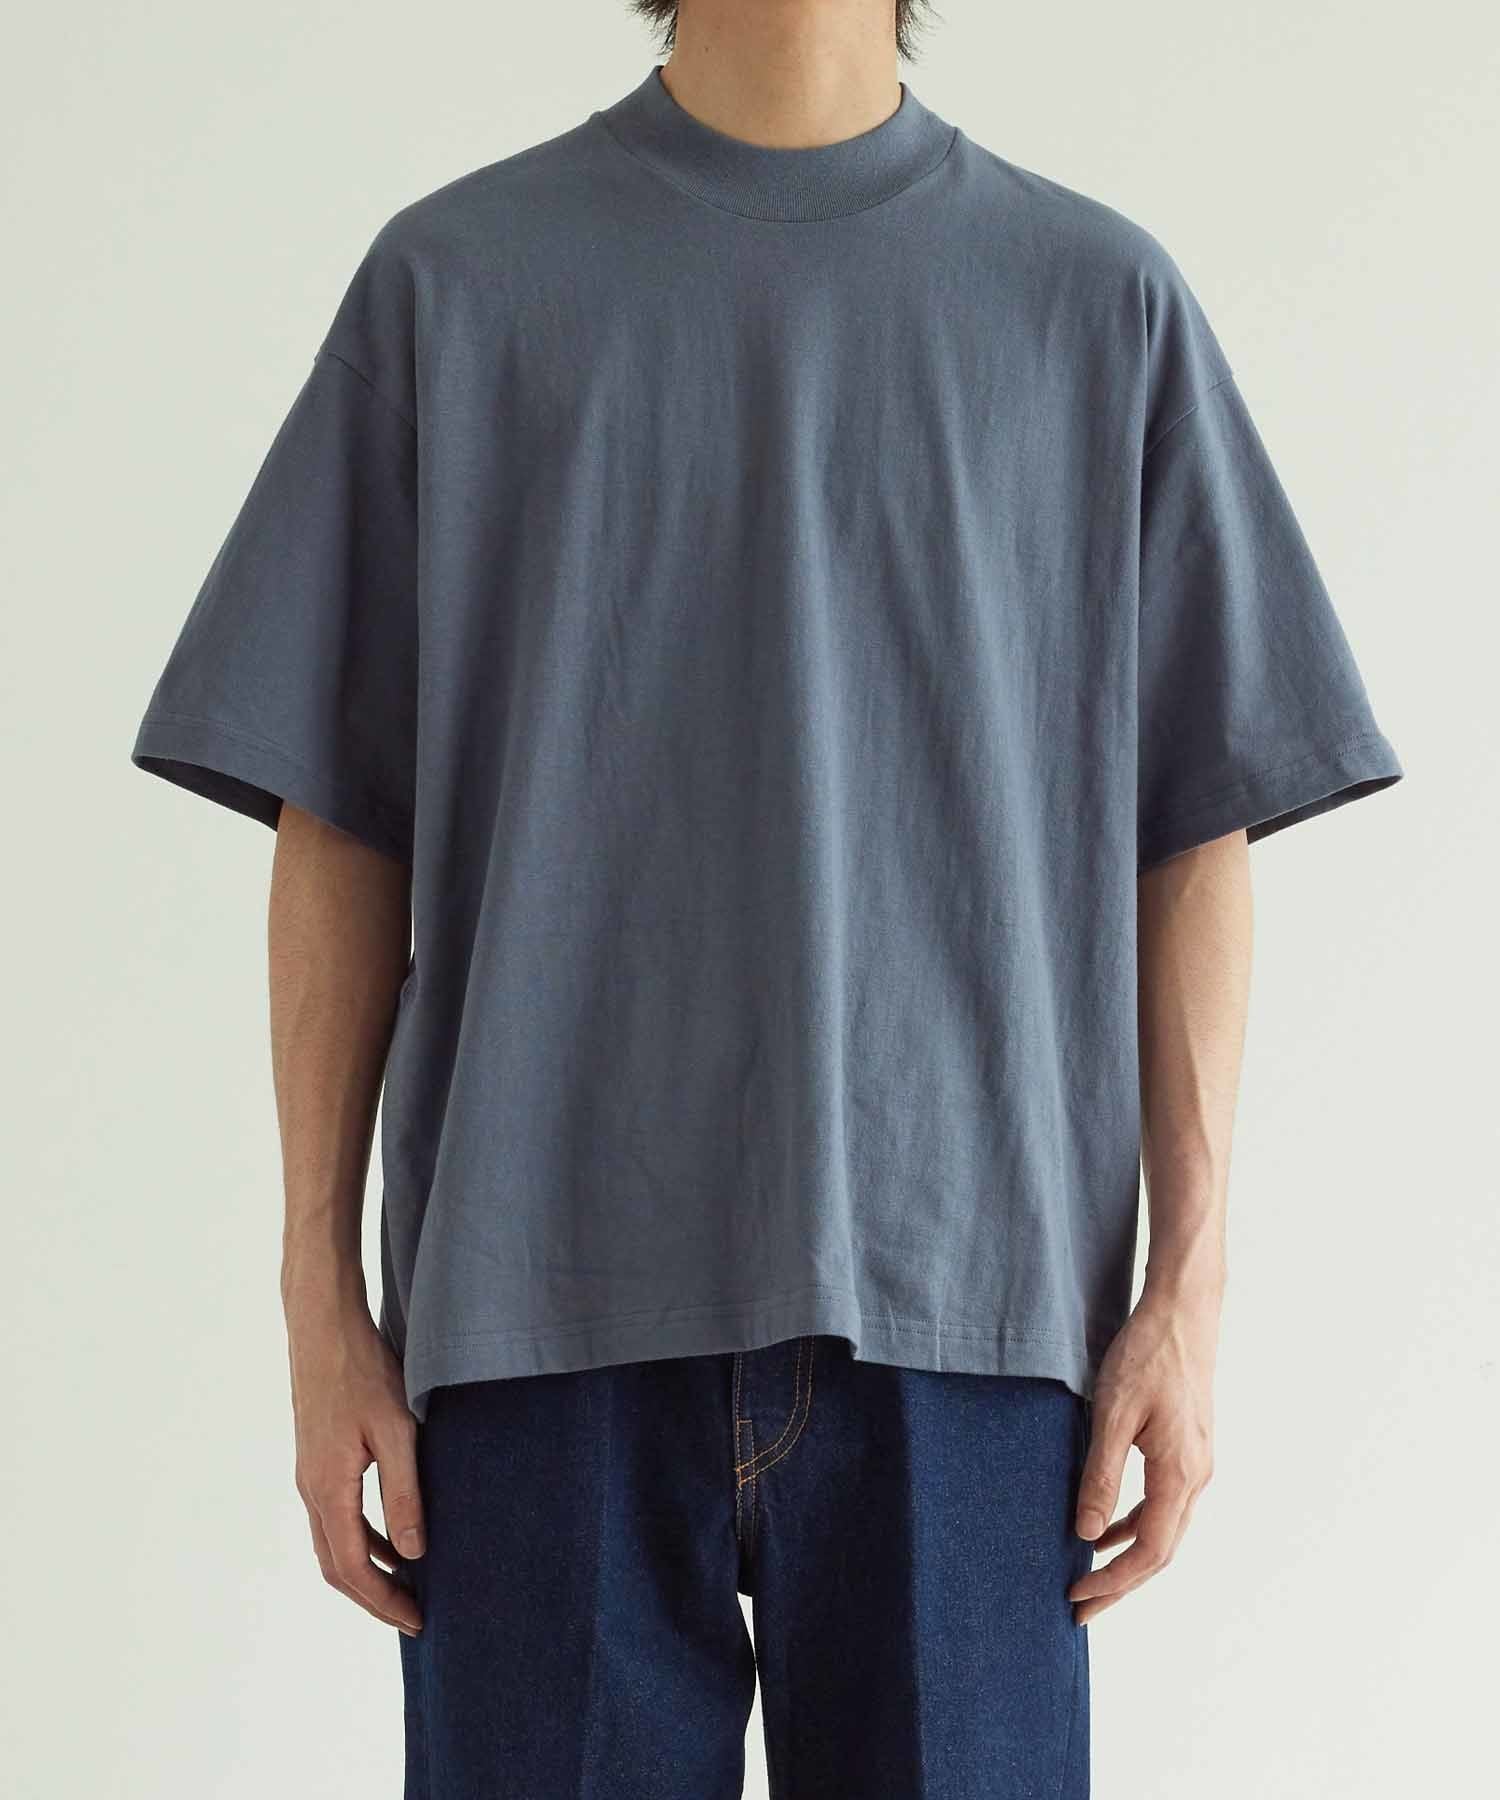 Hanes for BIOTOP】RECYCLE COTTON MOCK NECK T-SHIRTS（2枚パック ...